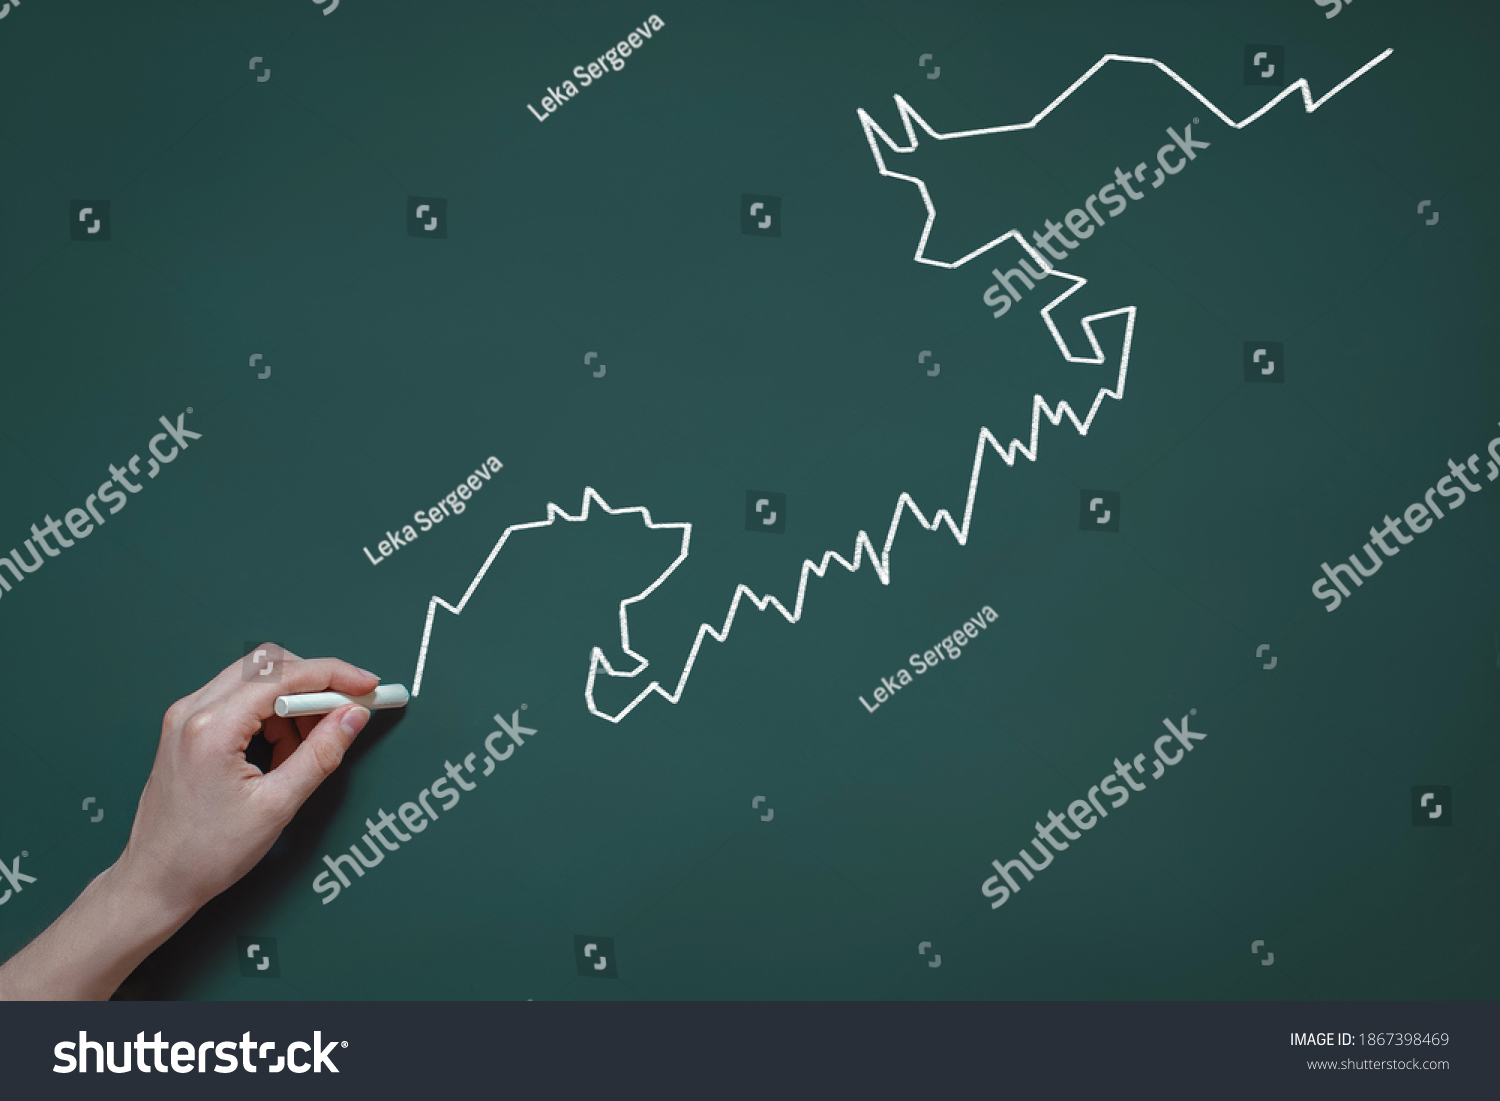 graph, diagram, chart of stock quotes drawn in chalk on a blackboard, the concept of trading, speculation, bulls and bears in the stock market, hand with chalk #1867398469